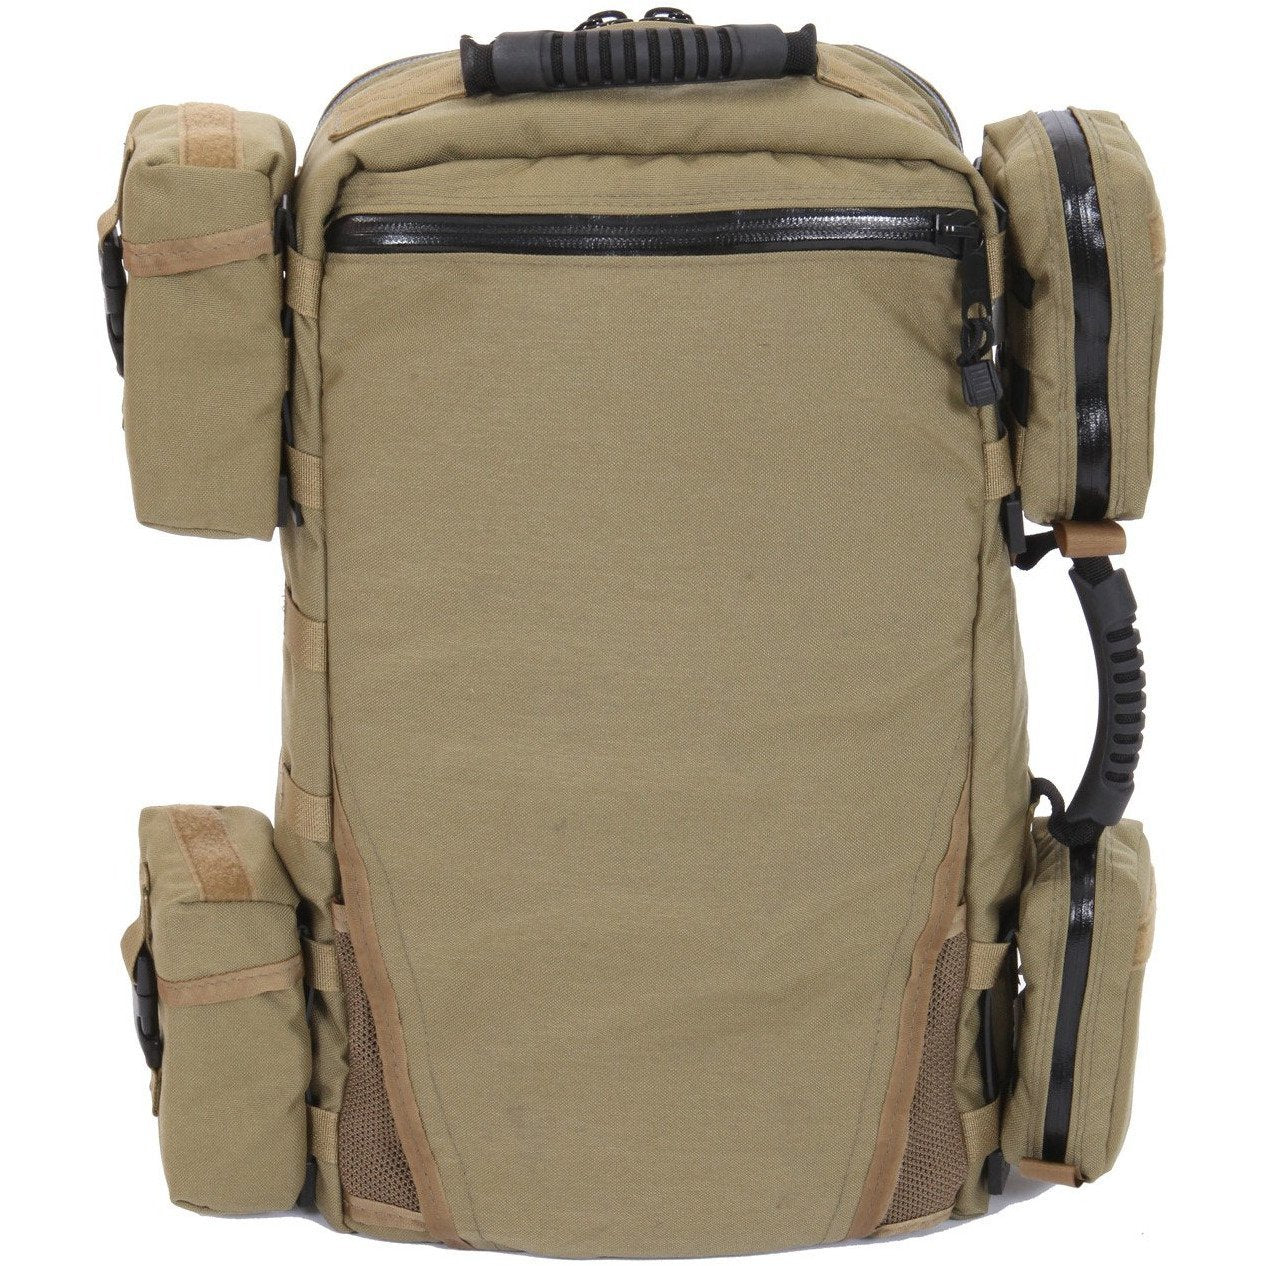 MED-TAC Tactical Medical Backpack w/Pouches - MED-TAC International Corp. - MED-TAC International